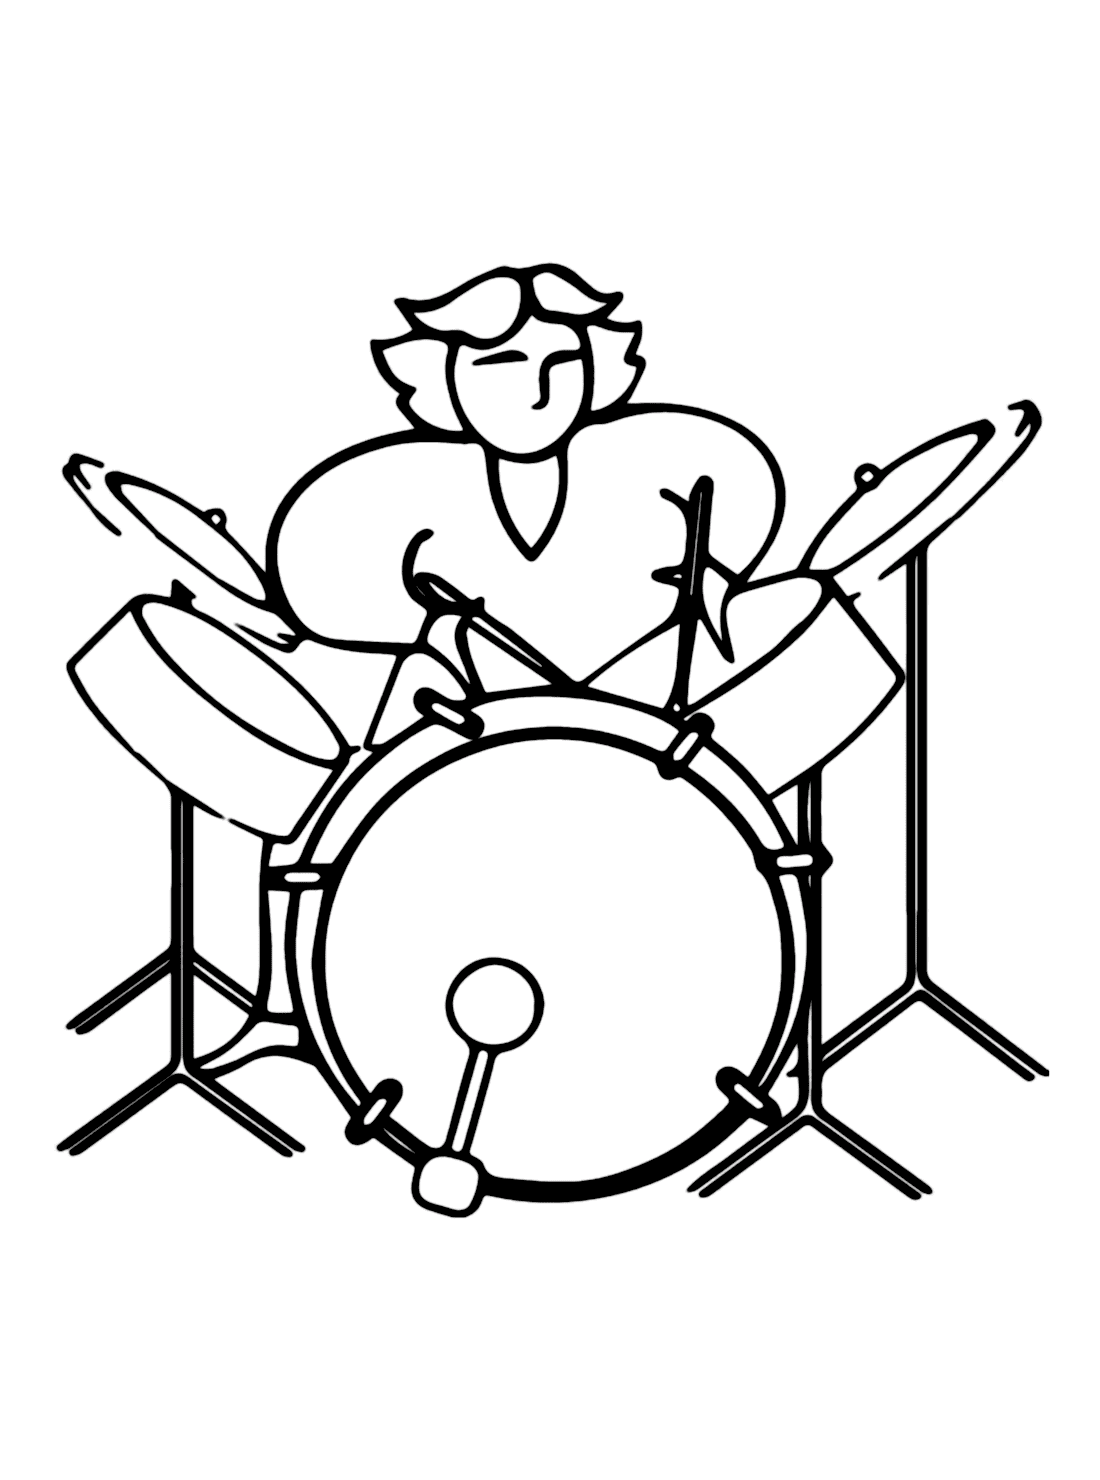 Drum and Music Ban Coloring Pages